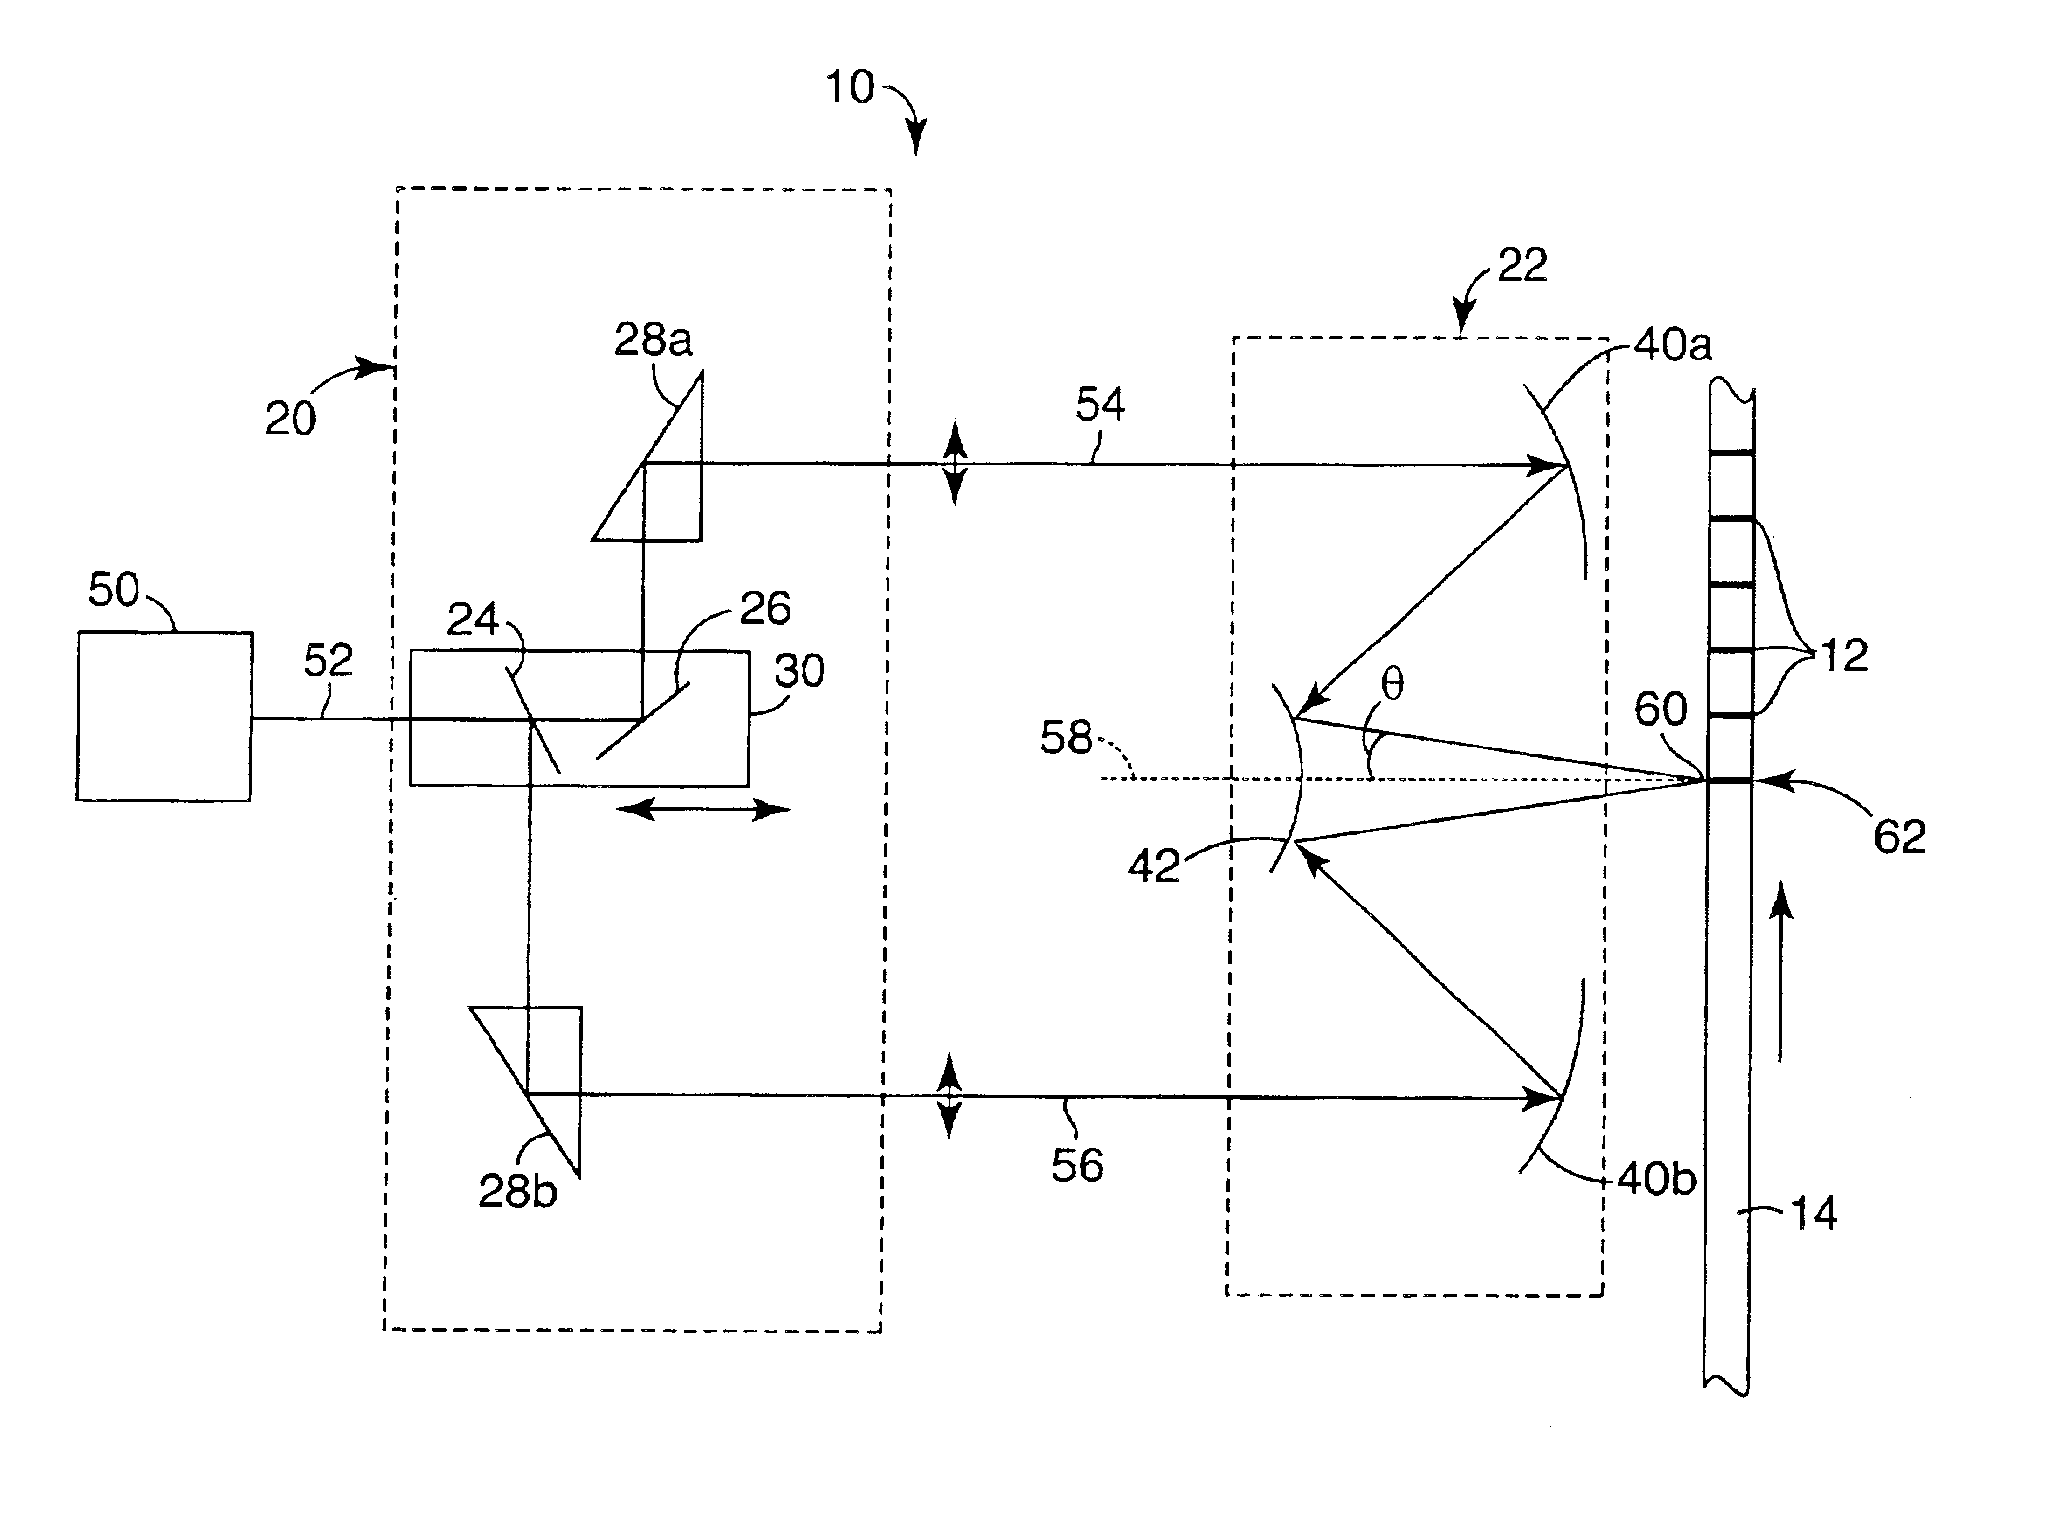 Fiber grating writing interferometer with continuous wavelength tuning and chirp capability